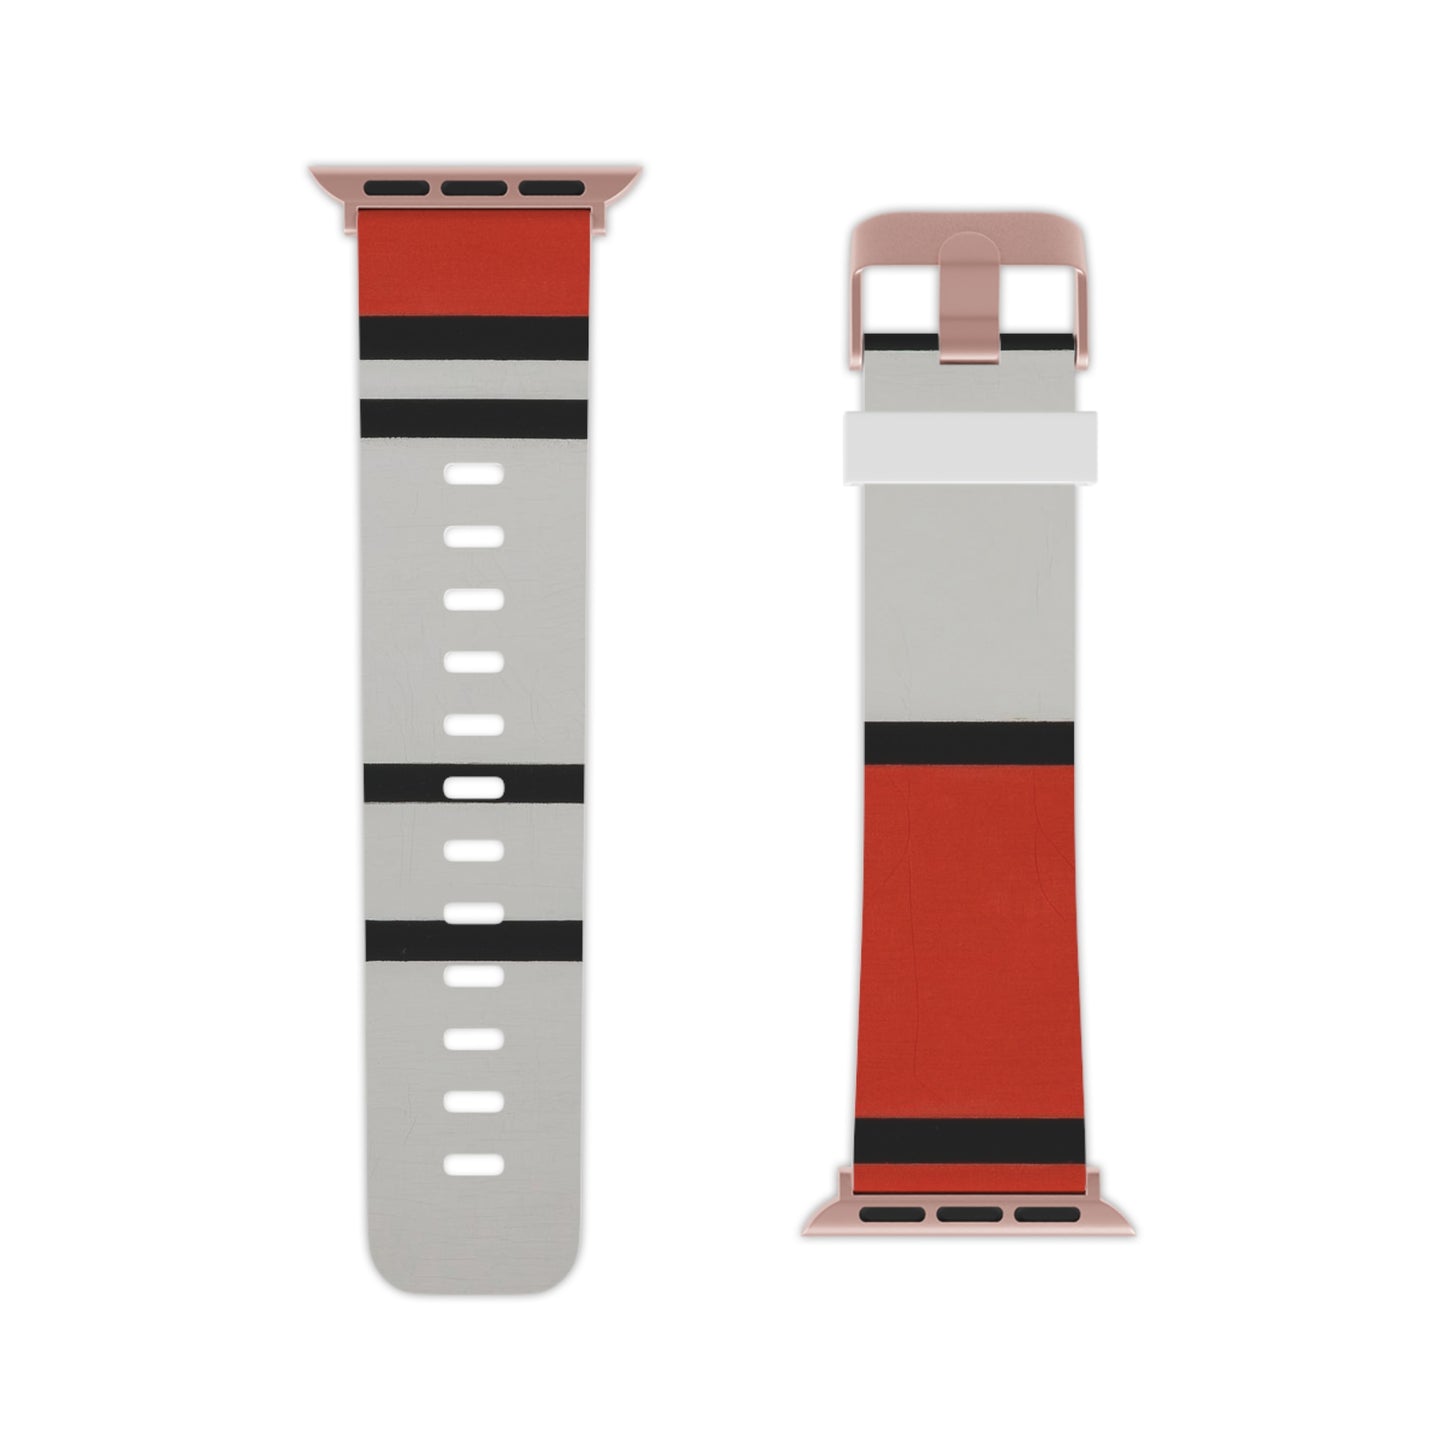 PIET MONDRIAN - COMPOSITION OF RED AND WHITE; Nom 1, COMPOSITION No. 4 WITH RED AND BLUE - ART WATCH BAND FOR APPLE WATCH